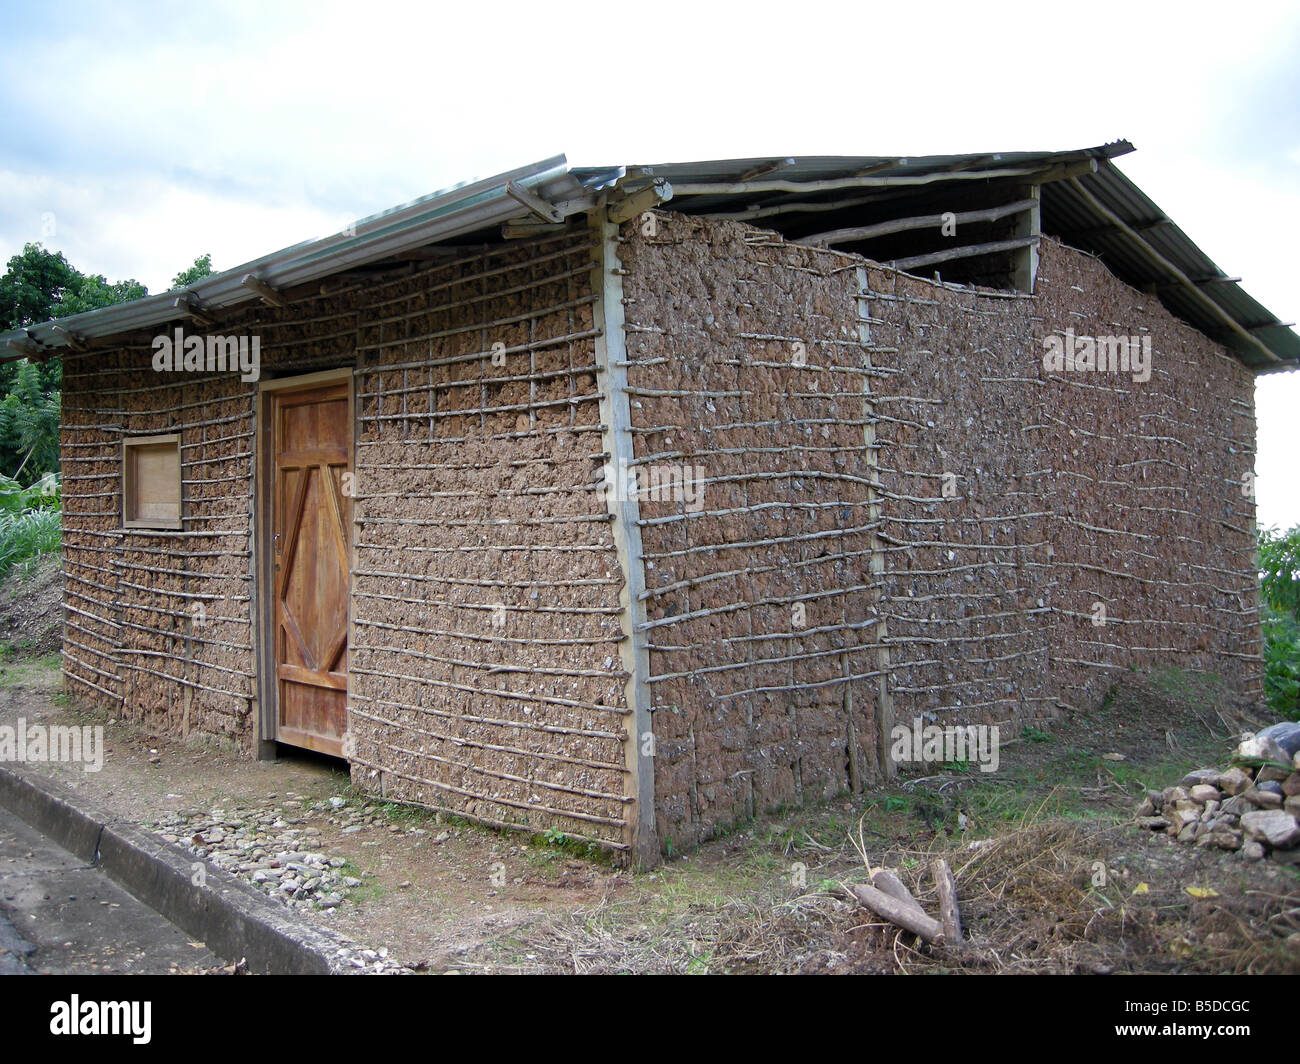 Native house make with mud and bamboo (bahareque), sucre state Venezuela Stock Photo